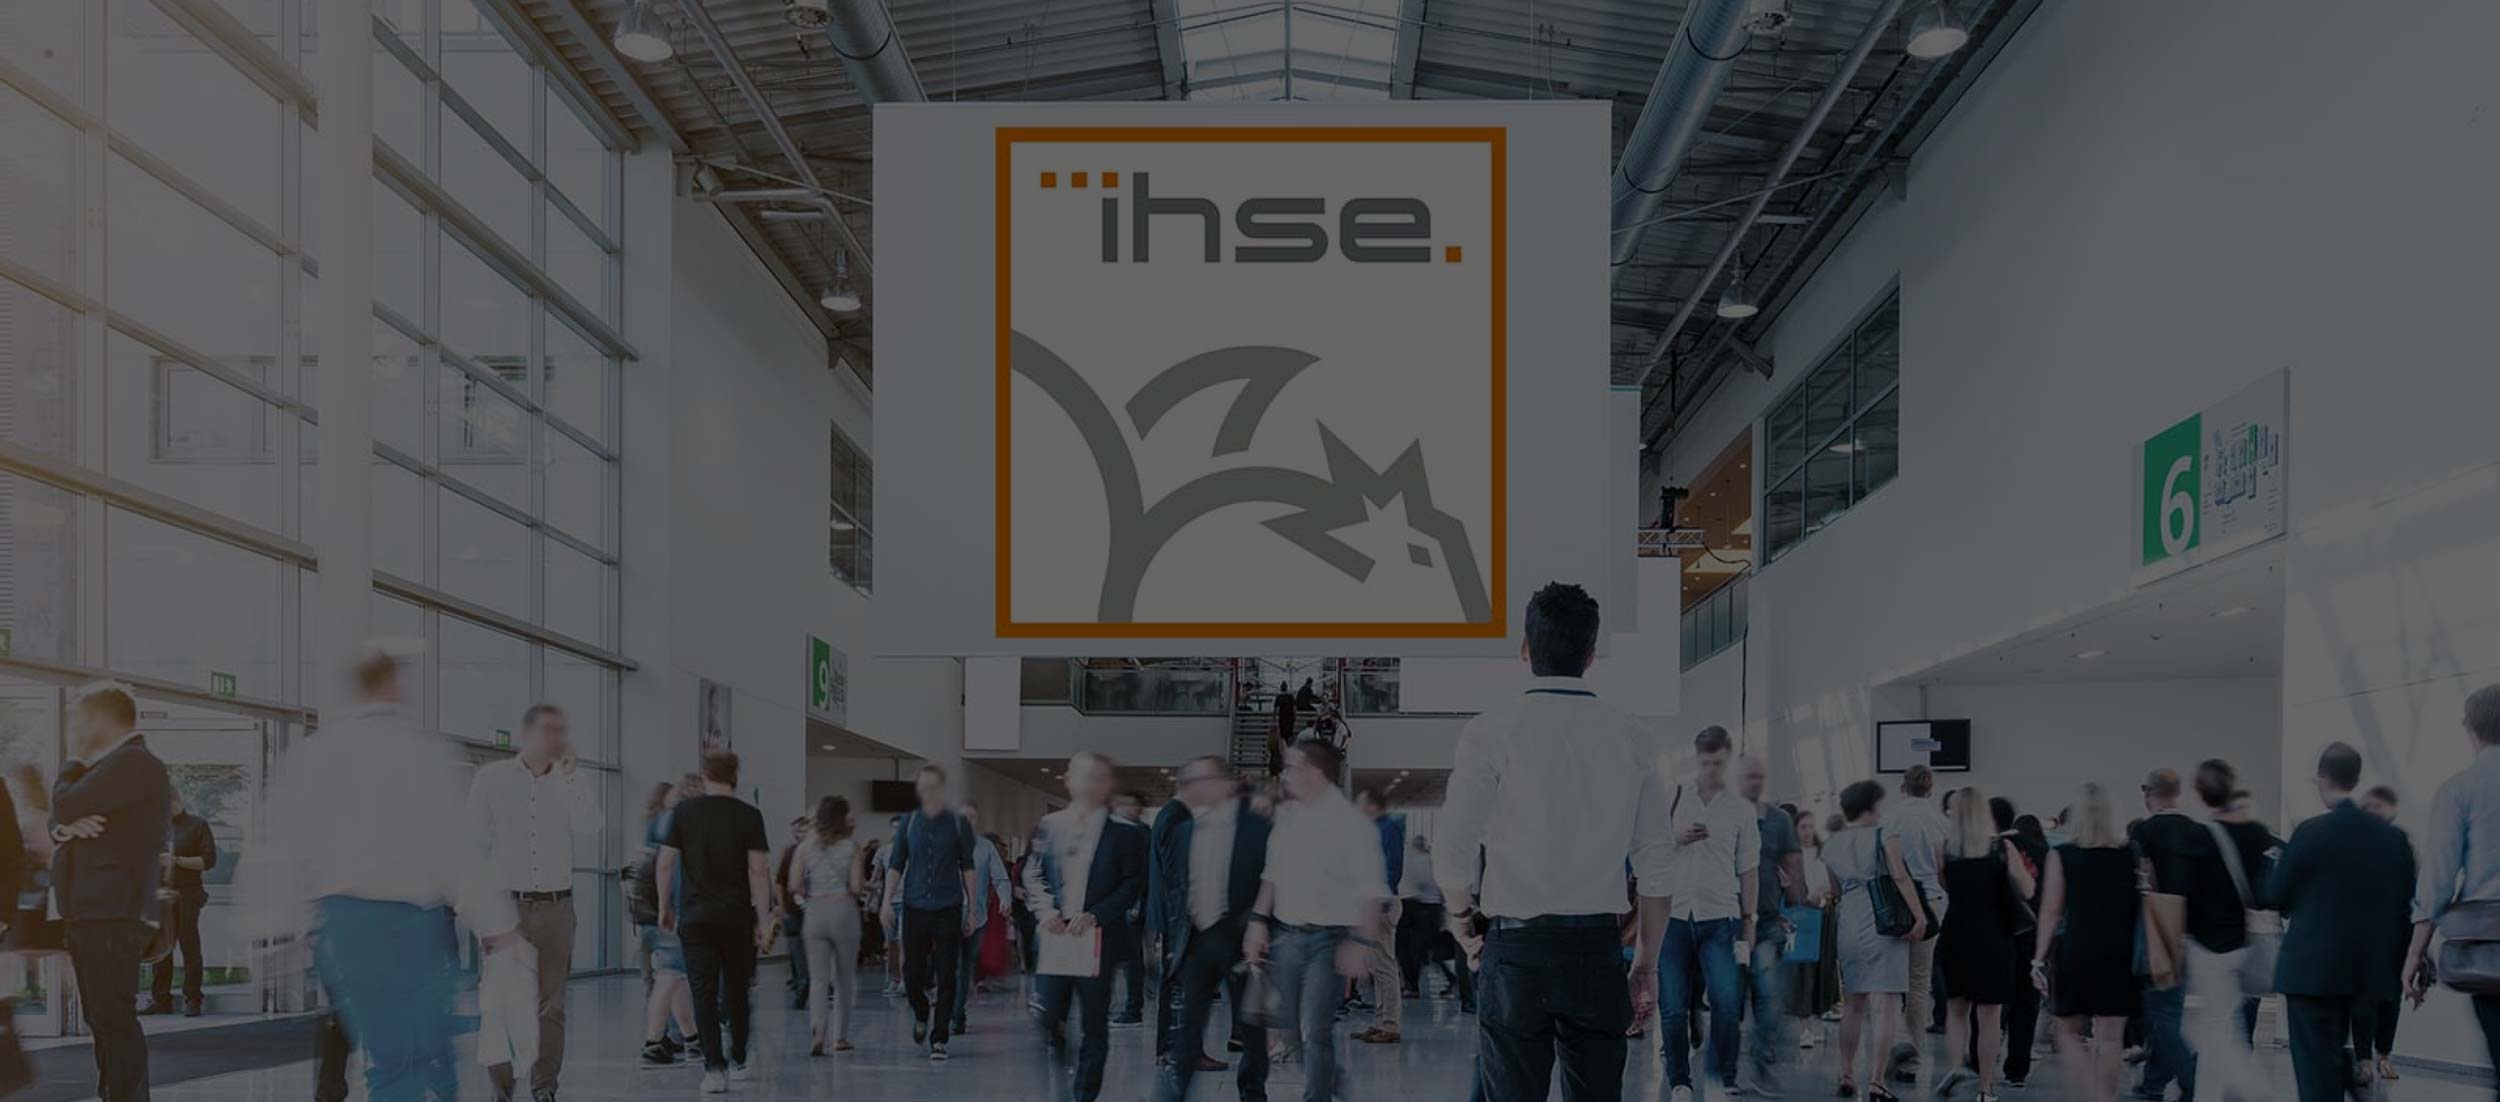 Meet IHSE at IBC 2022 and gain insight into KVM and future technology